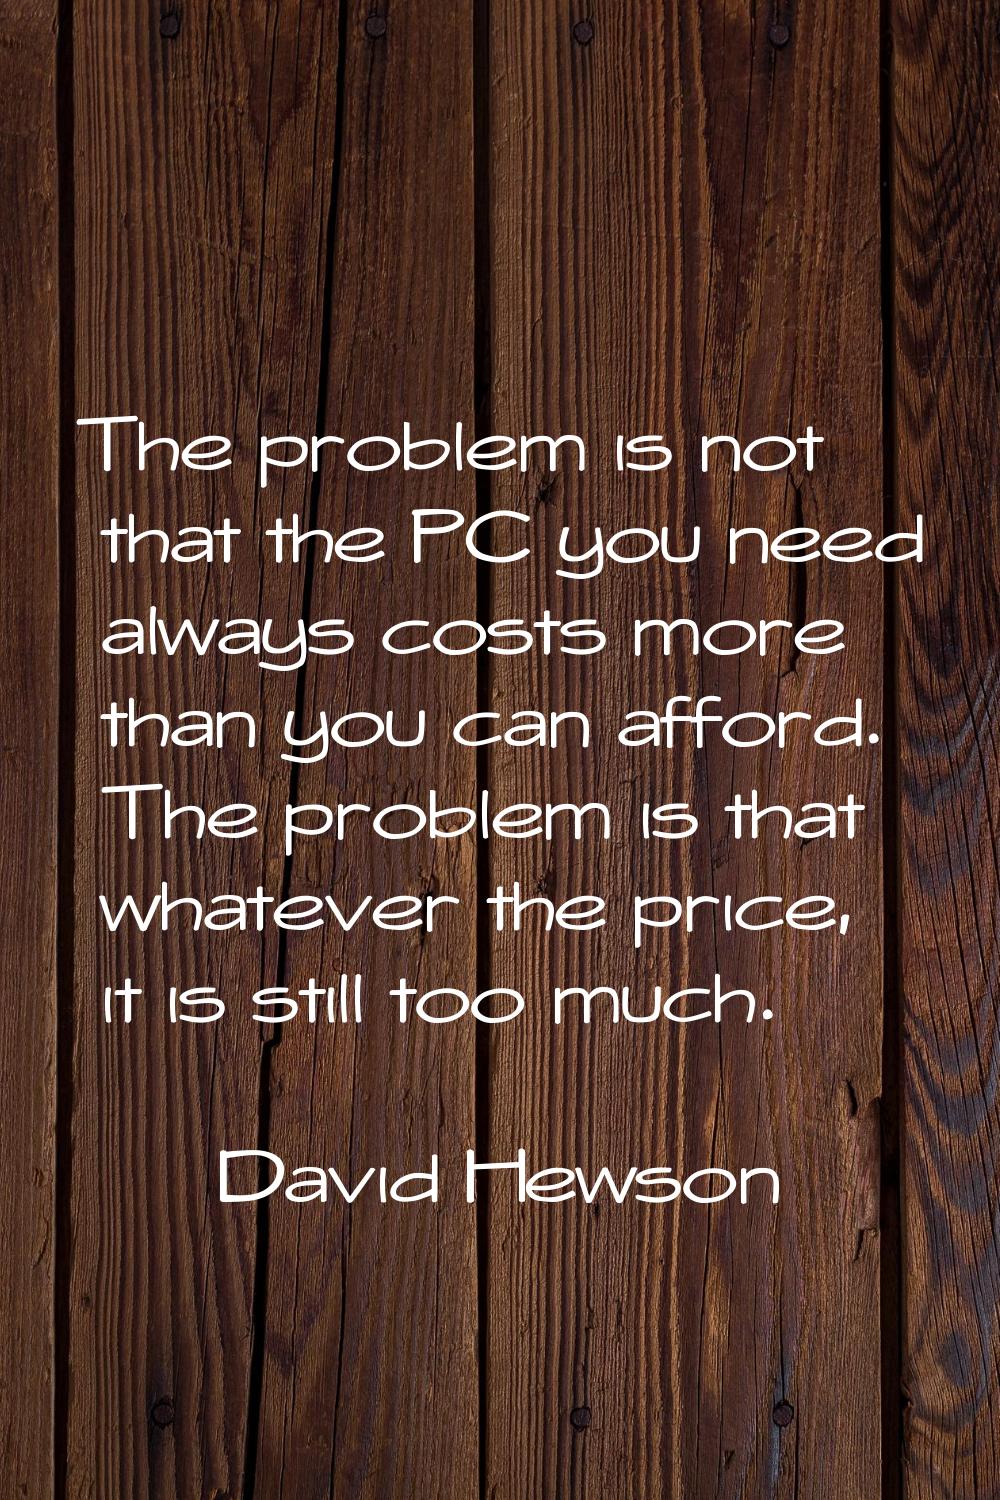 The problem is not that the PC you need always costs more than you can afford. The problem is that 